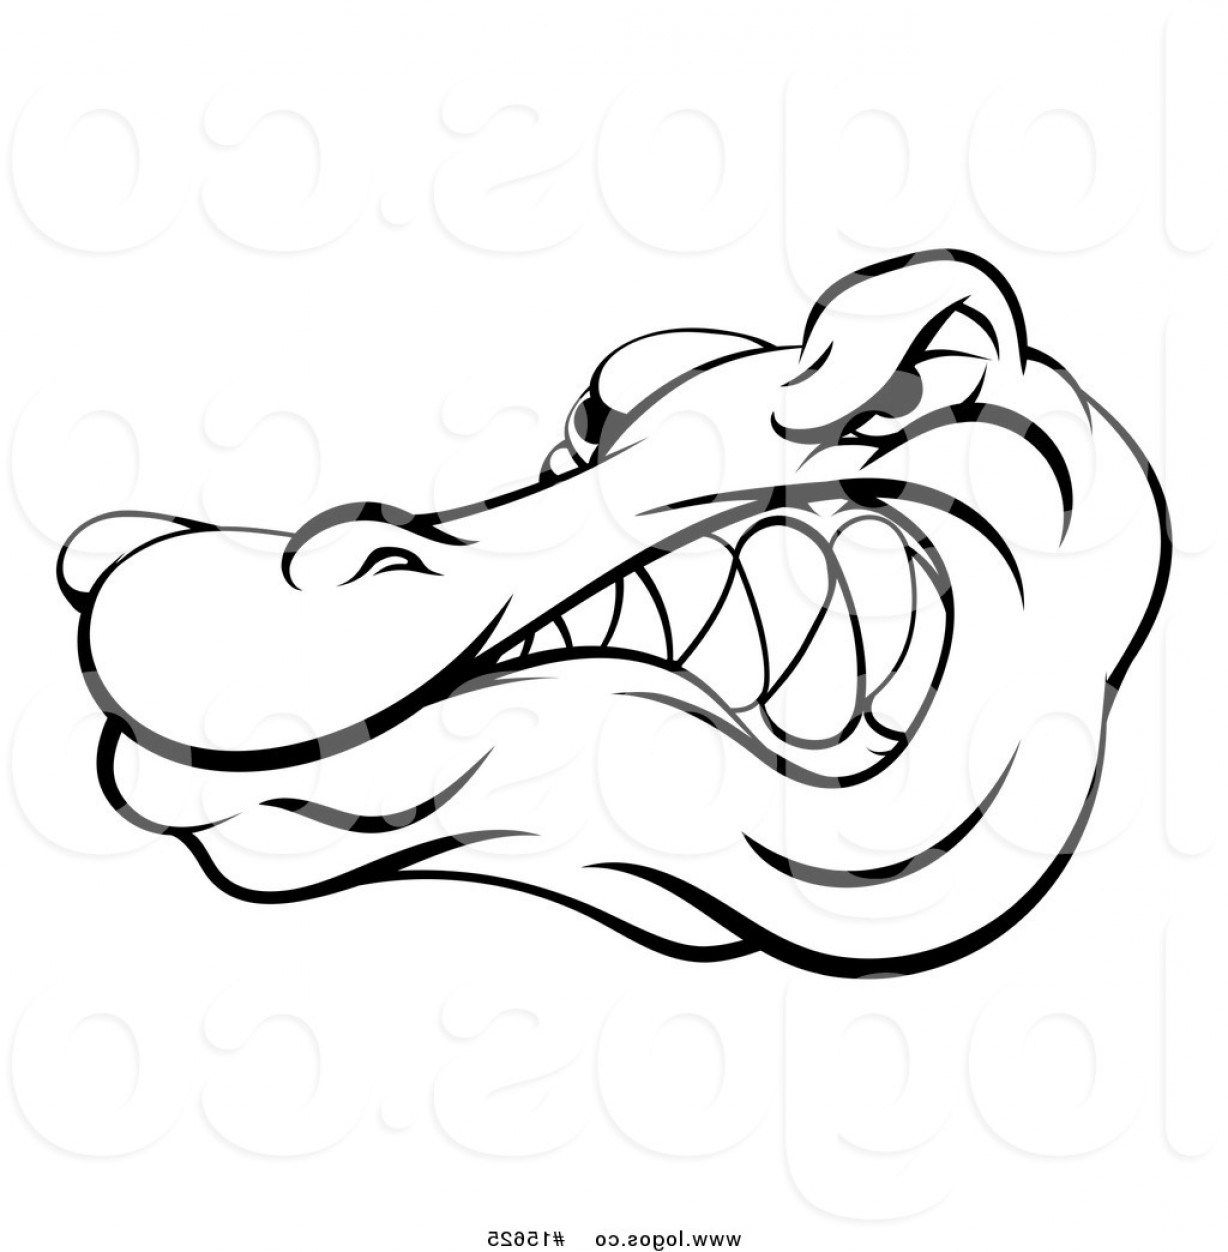 Download Gator Head Vector at Vectorified.com | Collection of Gator ...